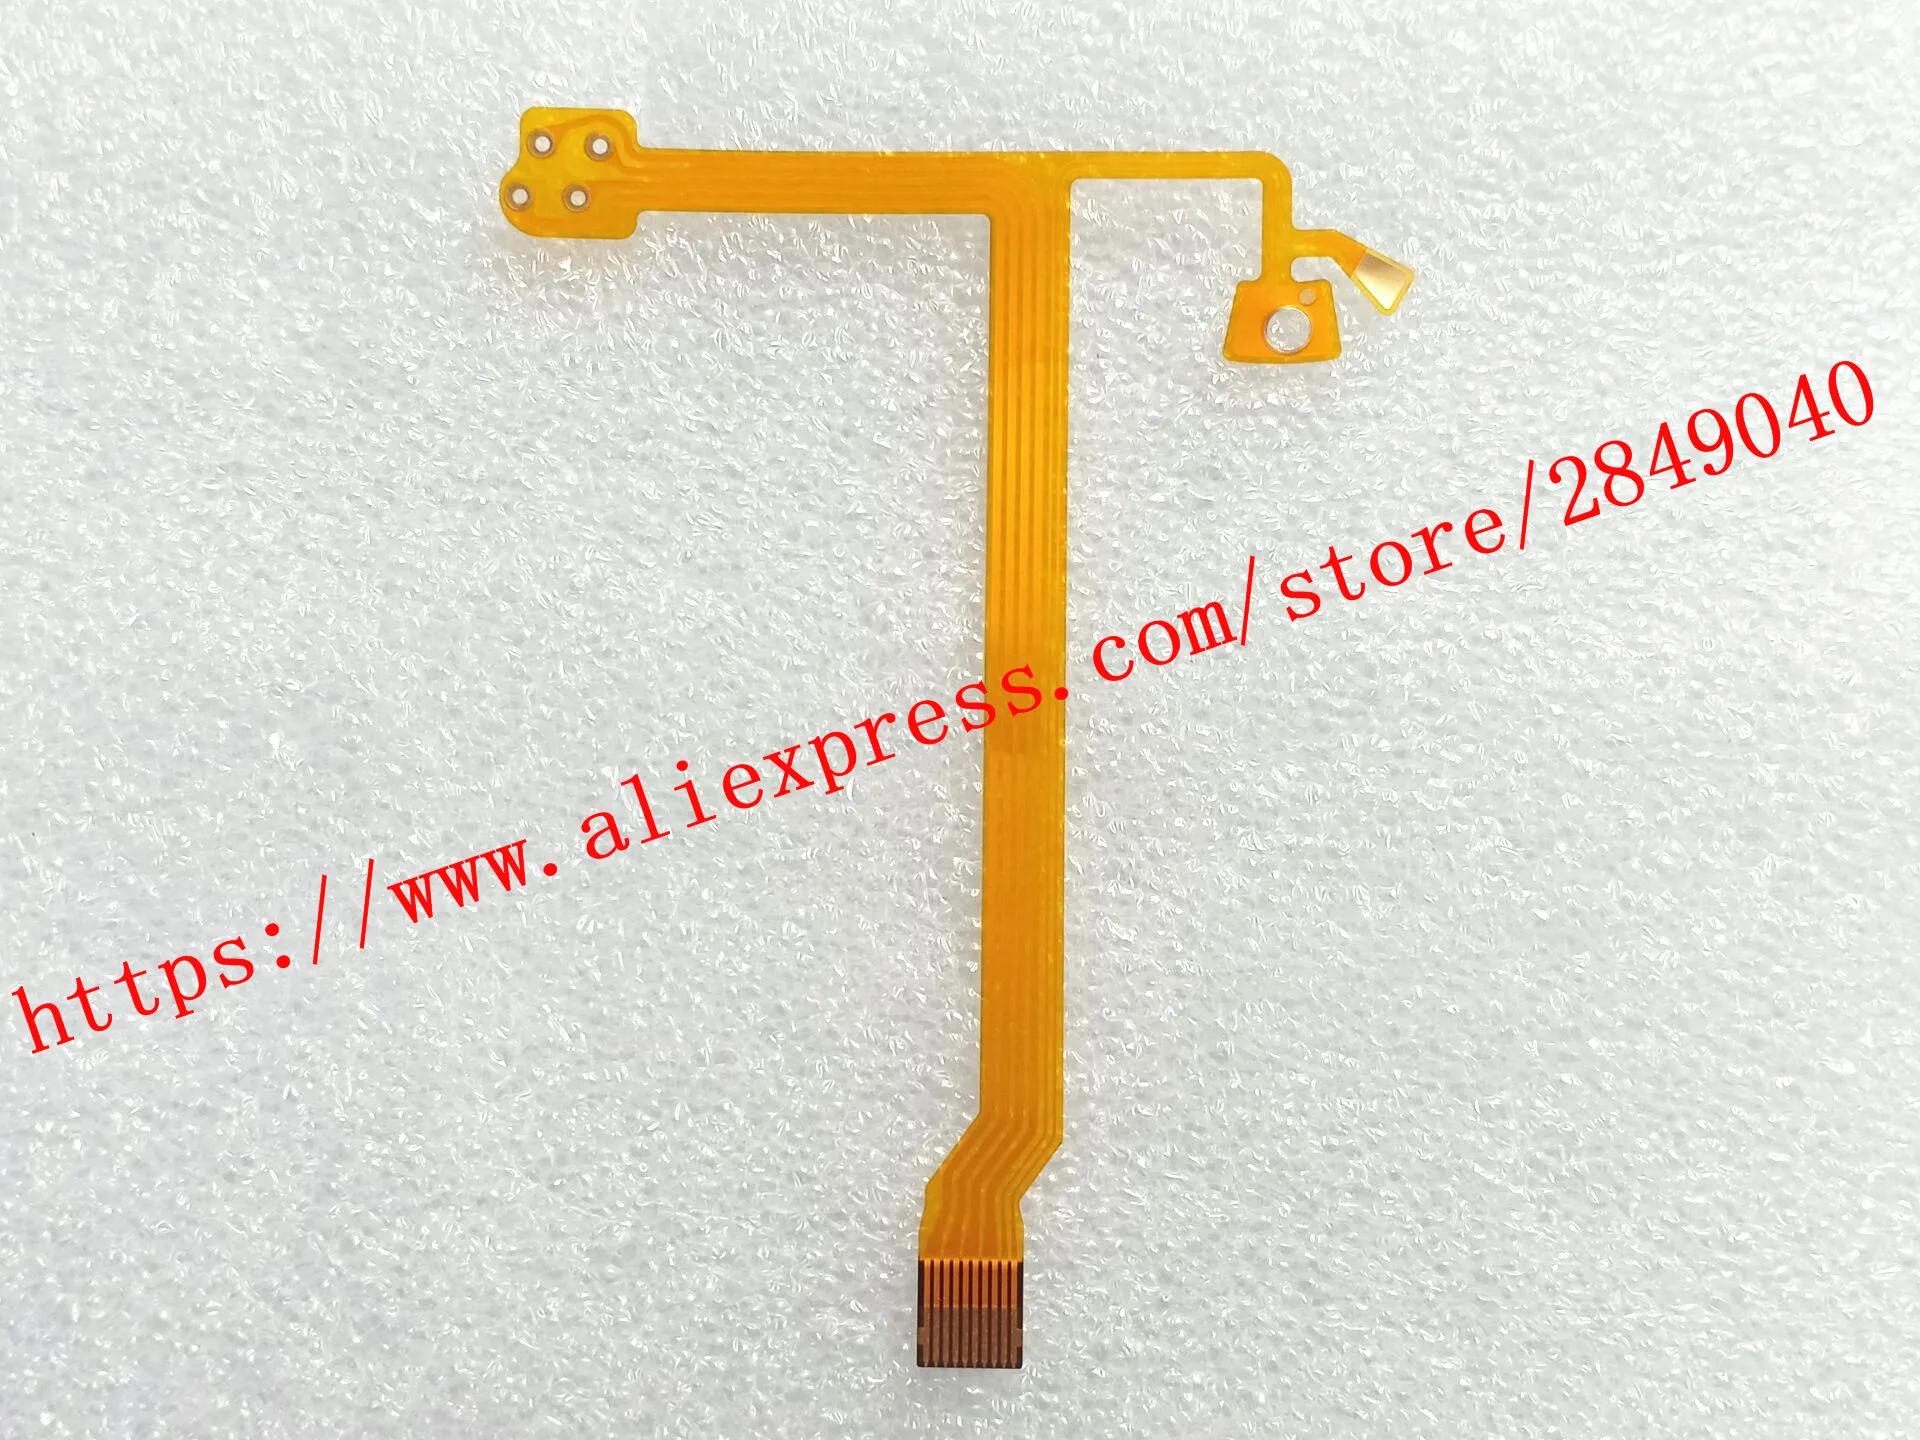 

NEW Lens Aperture Flex Cable for Tokina AT-X SD 11-20 mm 11-20mm F2.8 PRO DX Repair Part